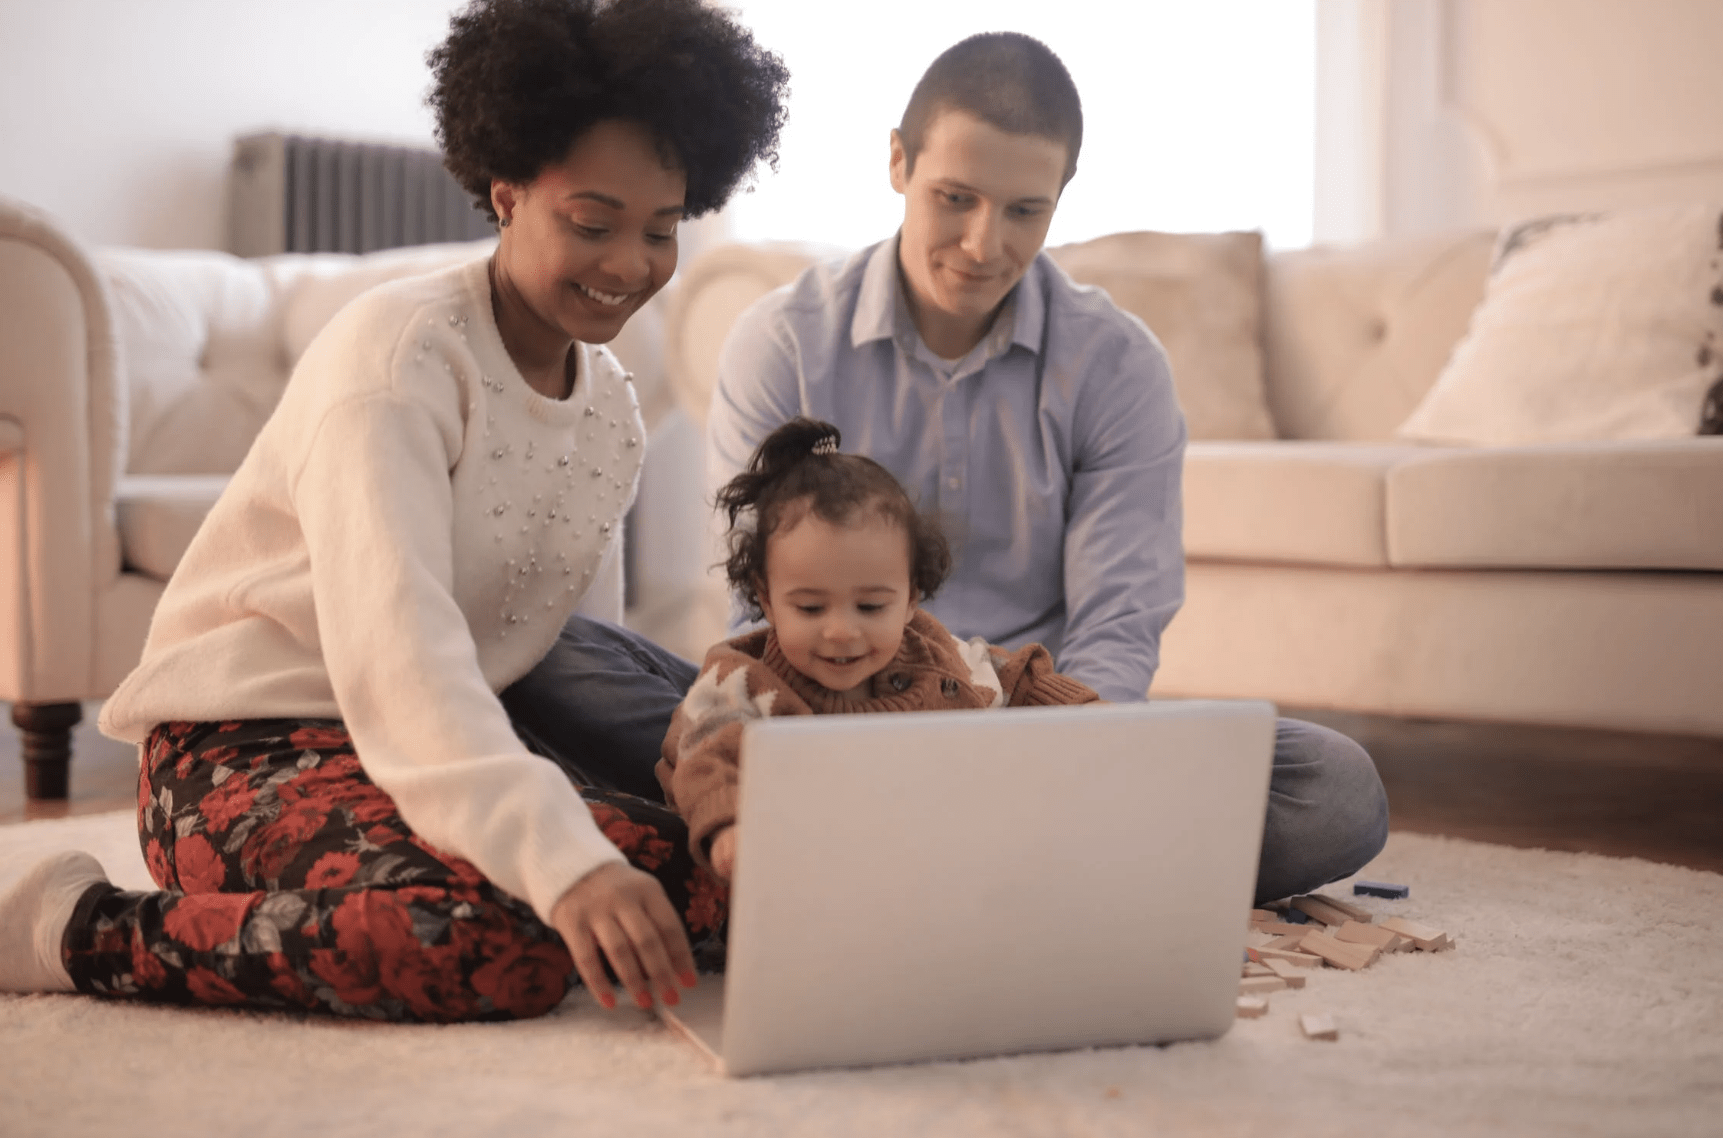 Parents and a young child joyfully playing together with a laptop and some building blocks.